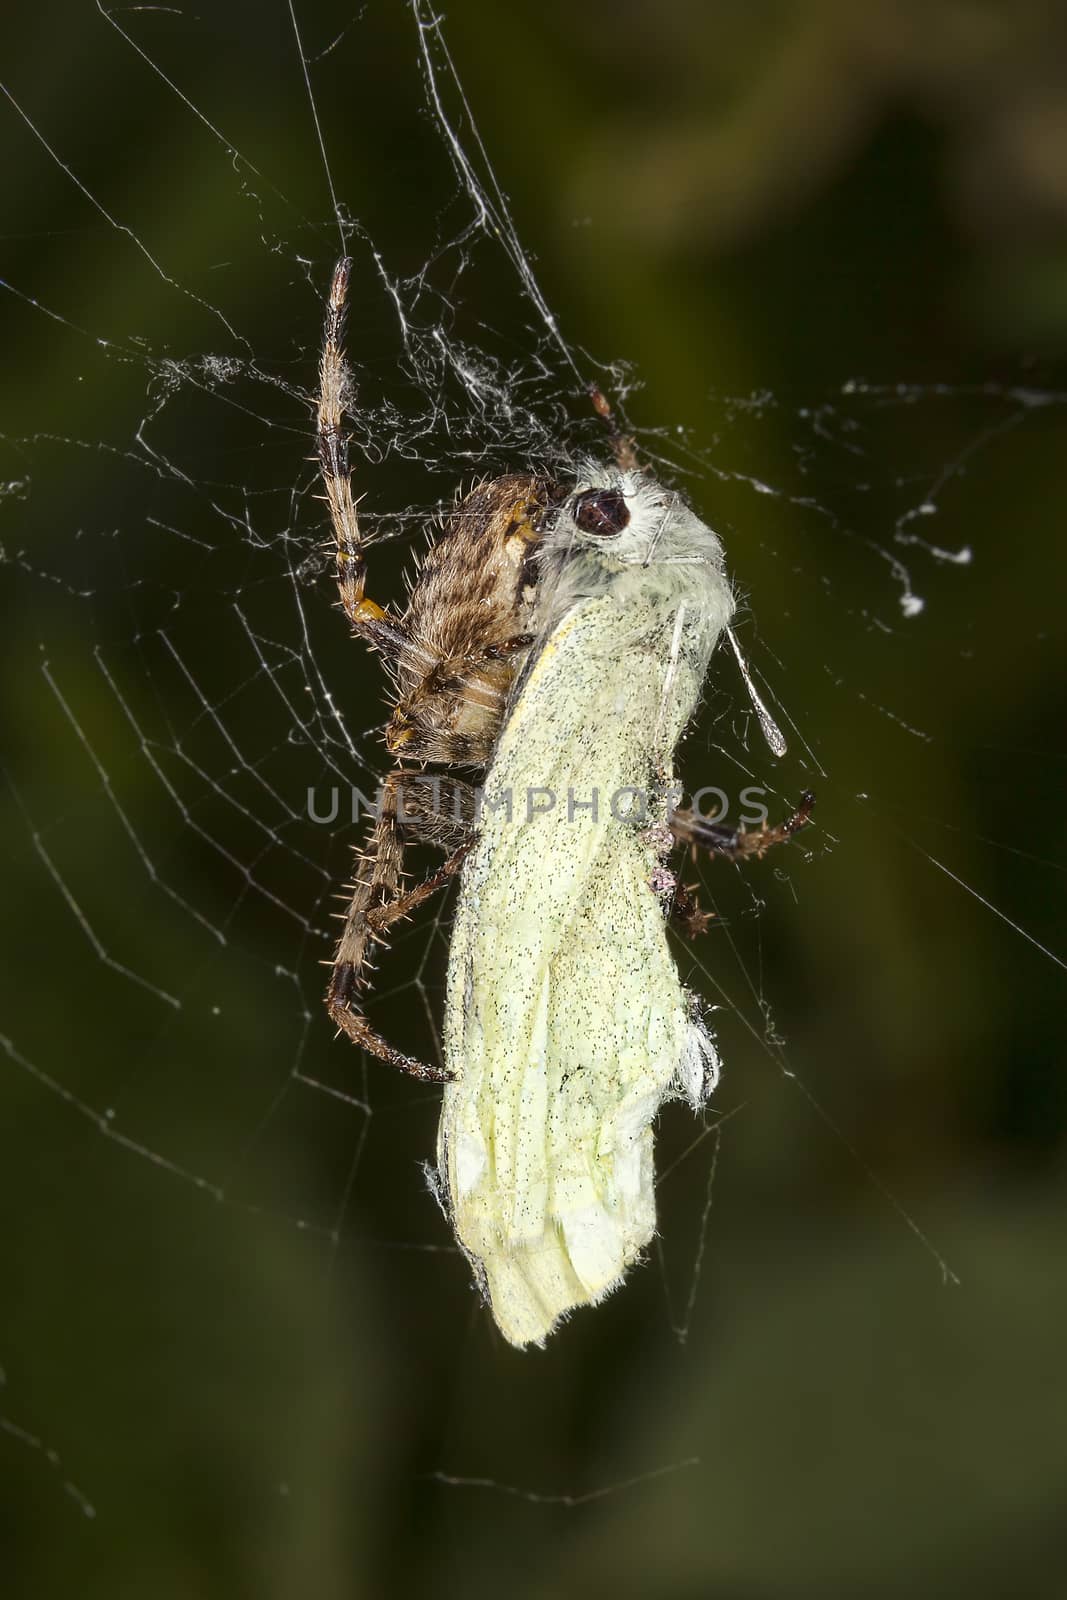 Common Garden Spider with a Cabbage White Butterfly which it has caught in its web for a meal